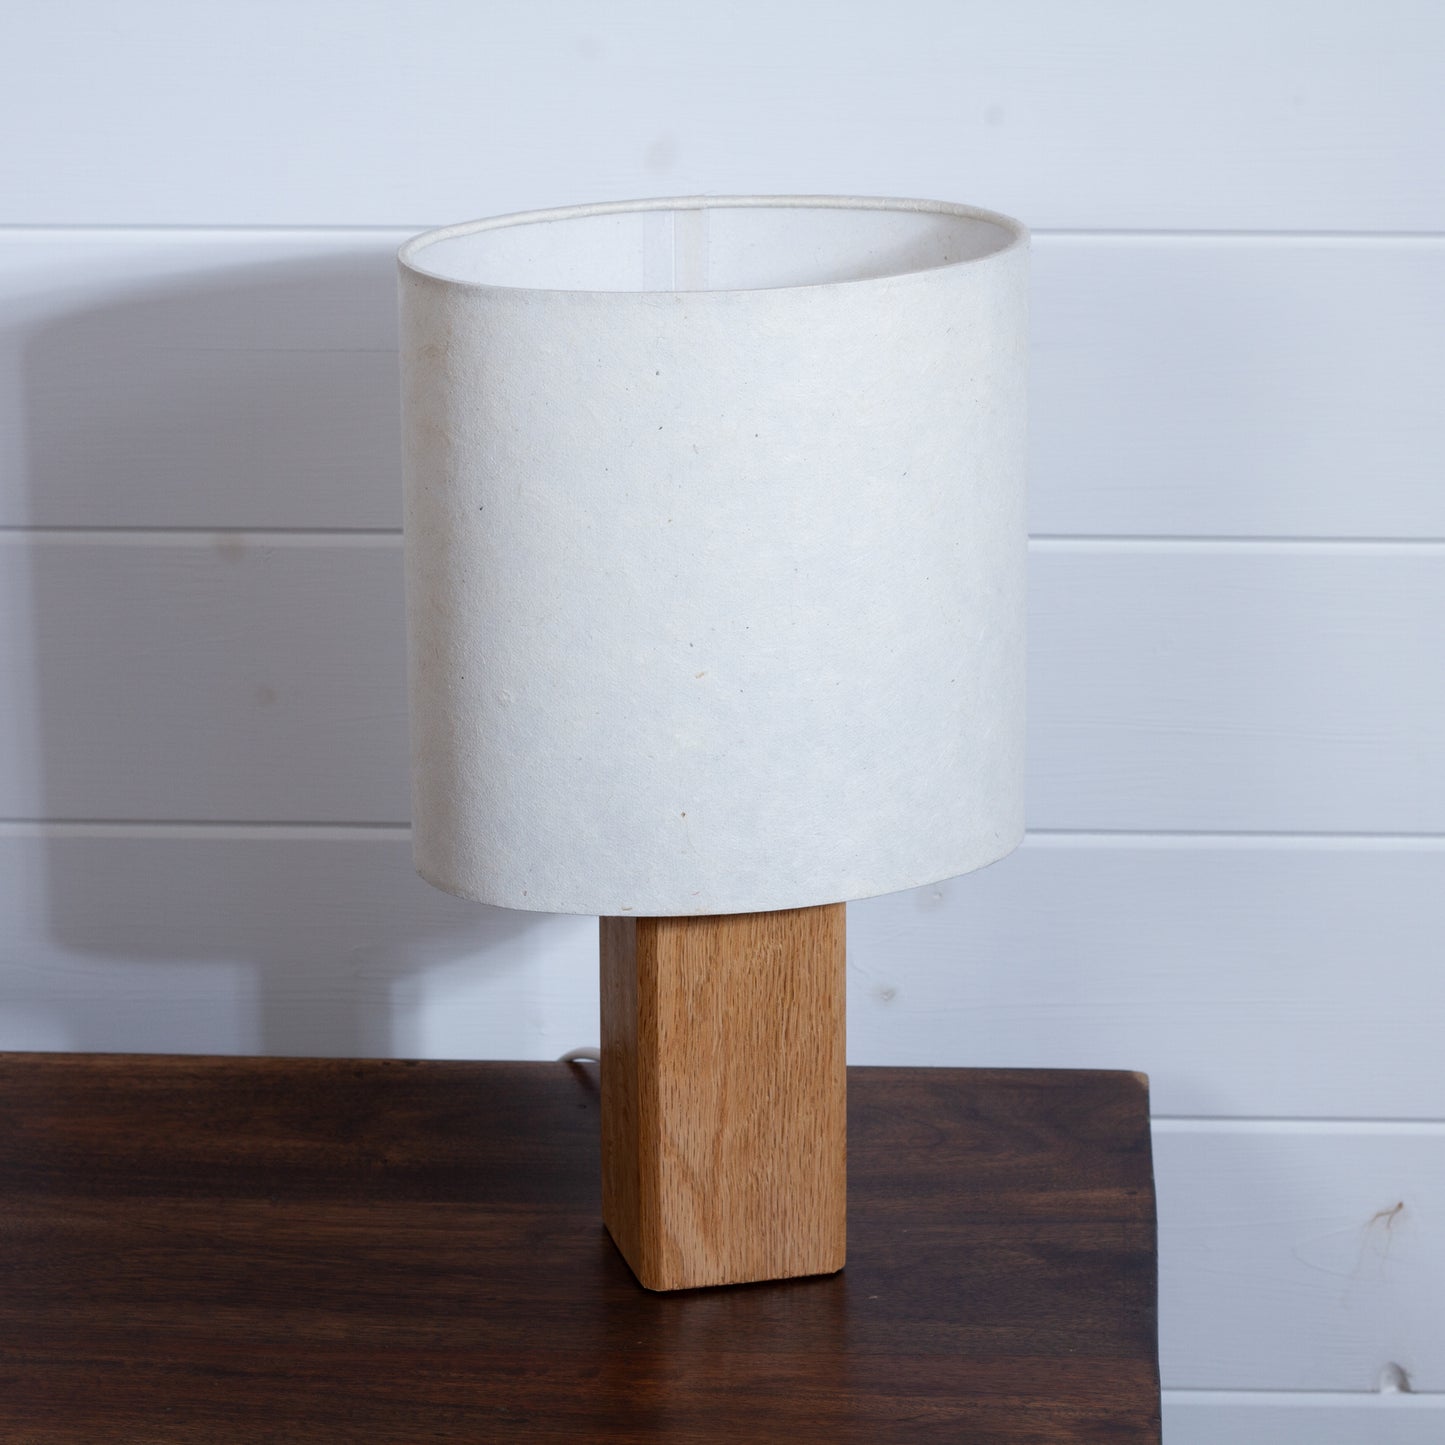 Square Oak Lamp Base with Oval Lamp shade in P54 - Natural Lokta